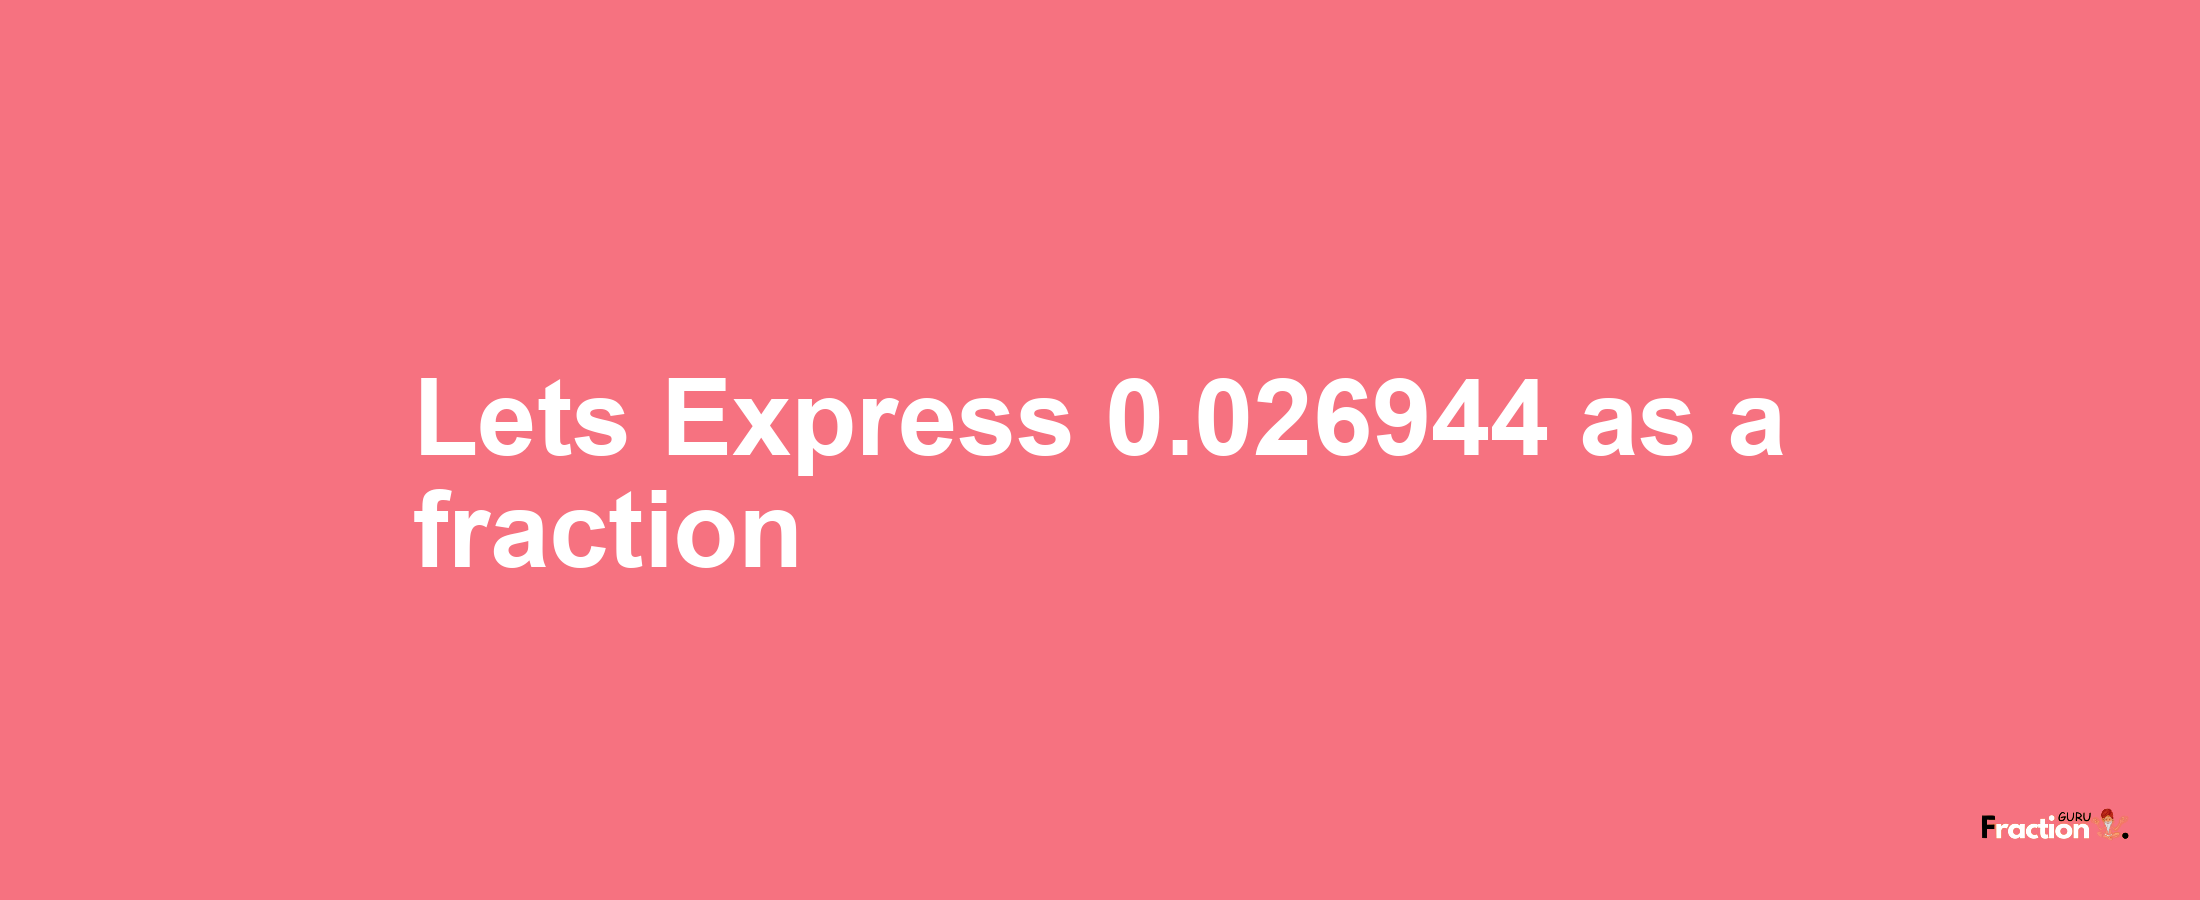 Lets Express 0.026944 as afraction